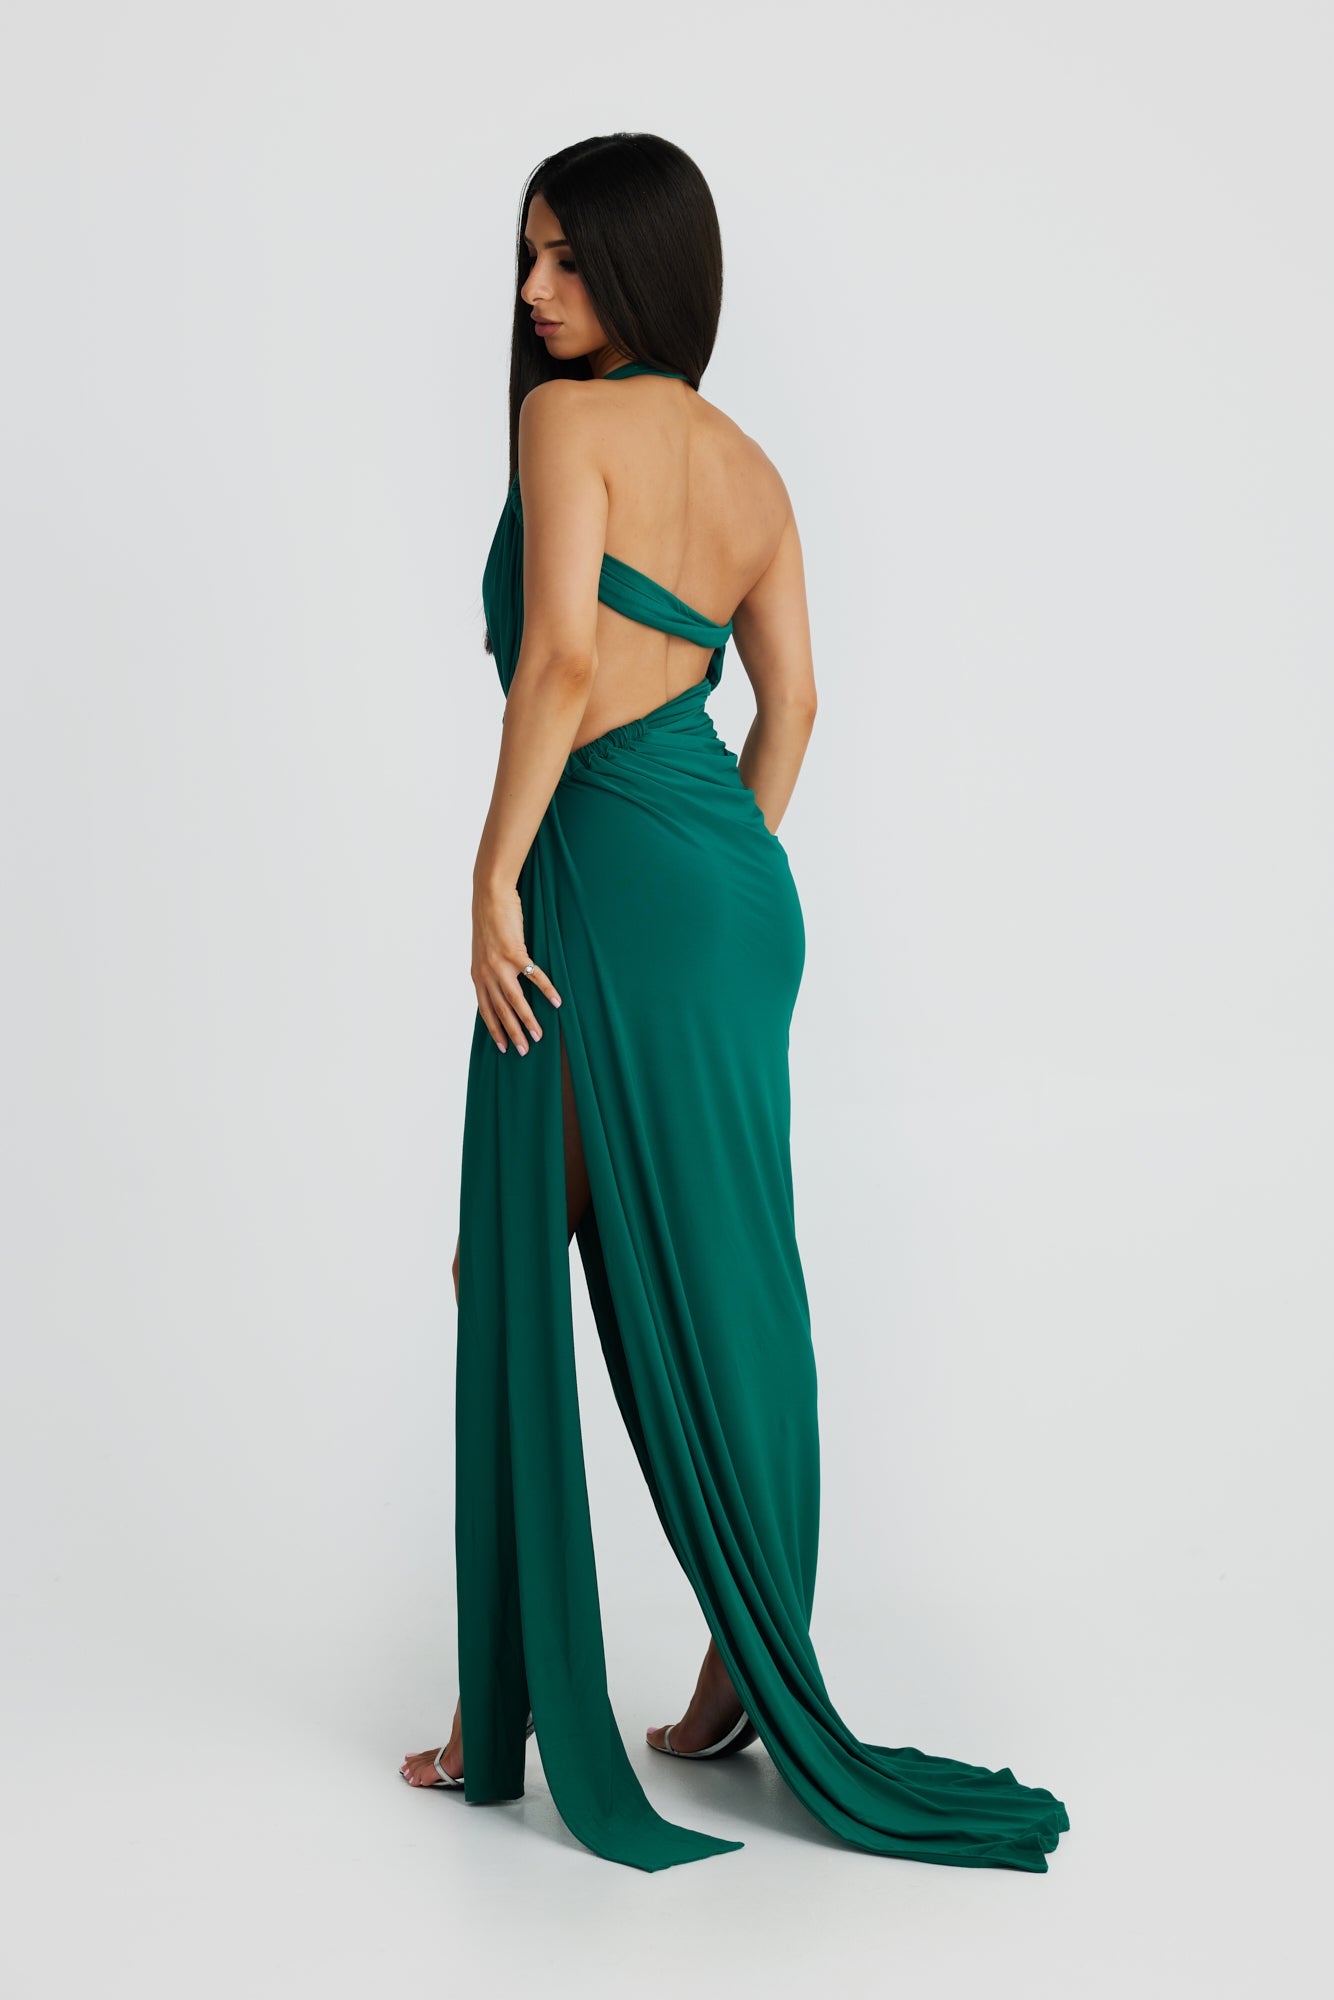 KAILANI GOWN - EMERALD